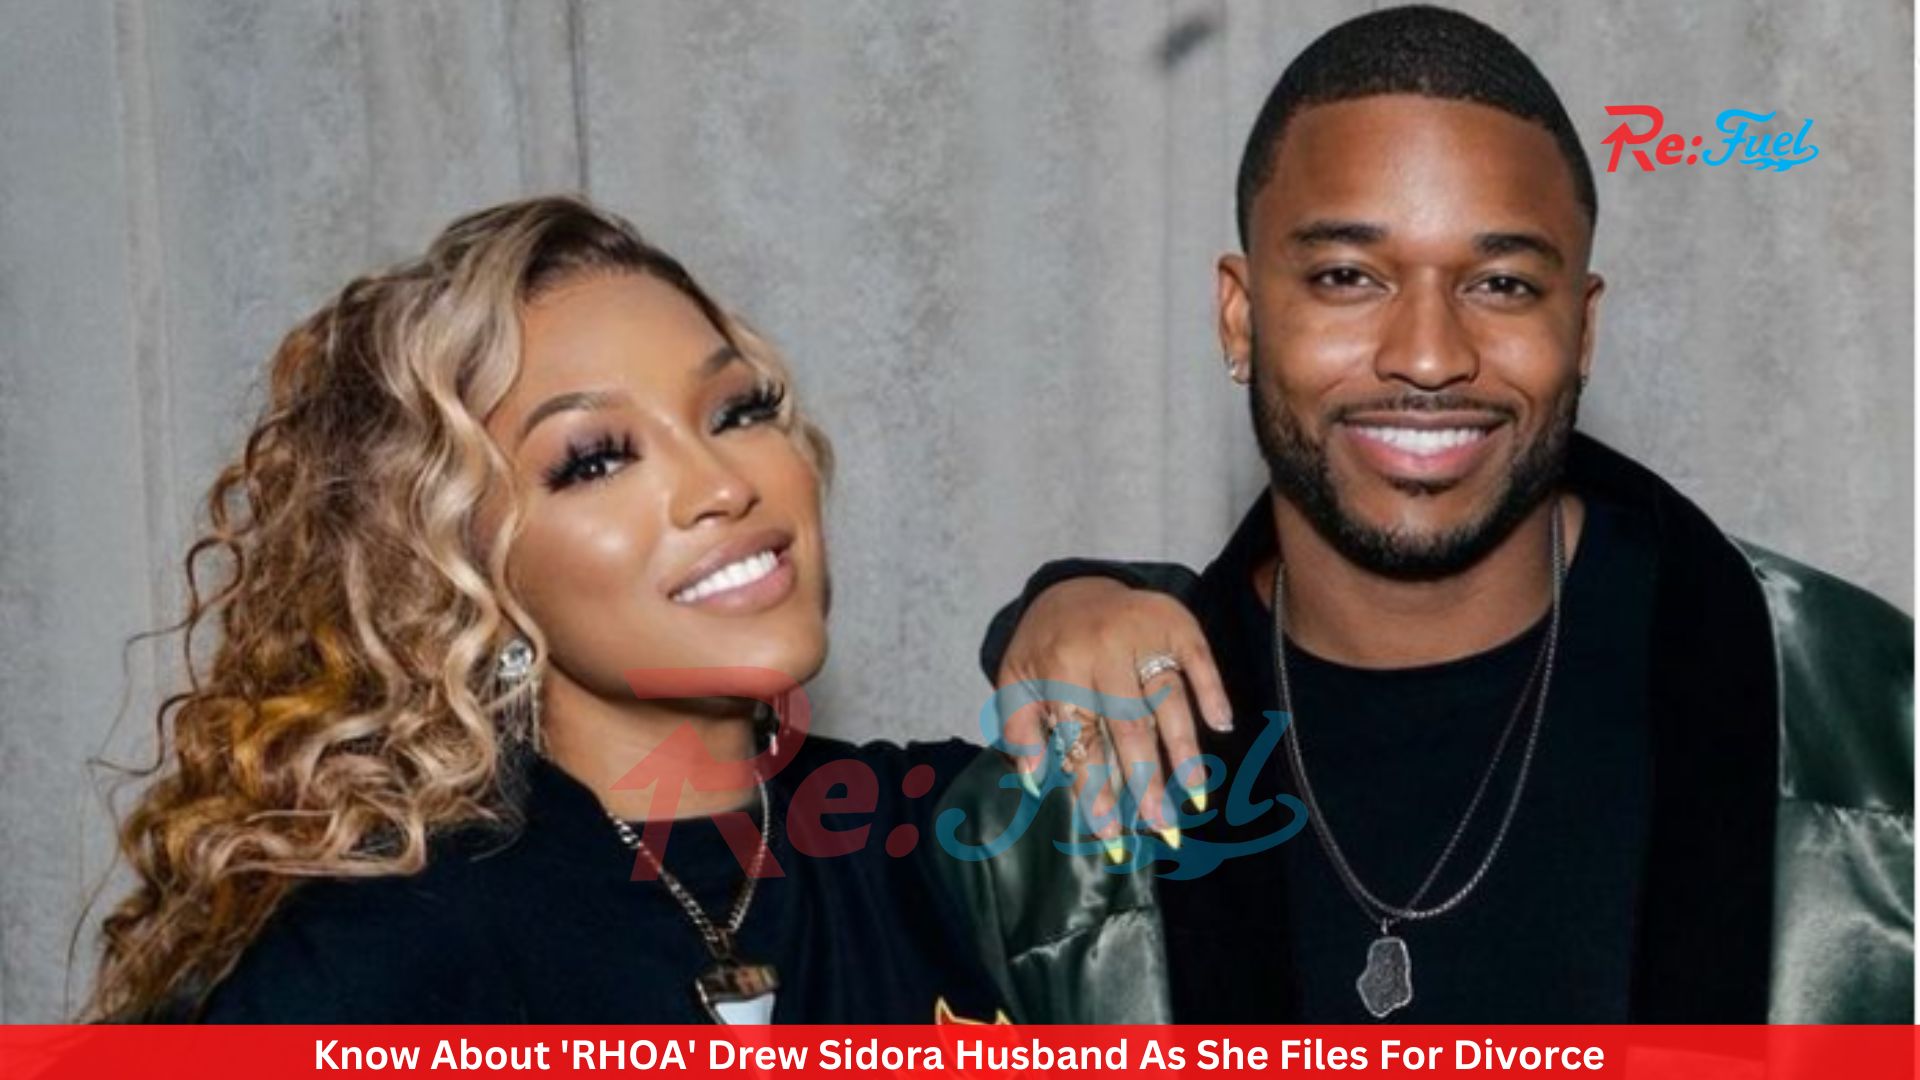 Know About 'RHOA' Drew Sidora Husband As She Files For Divorce